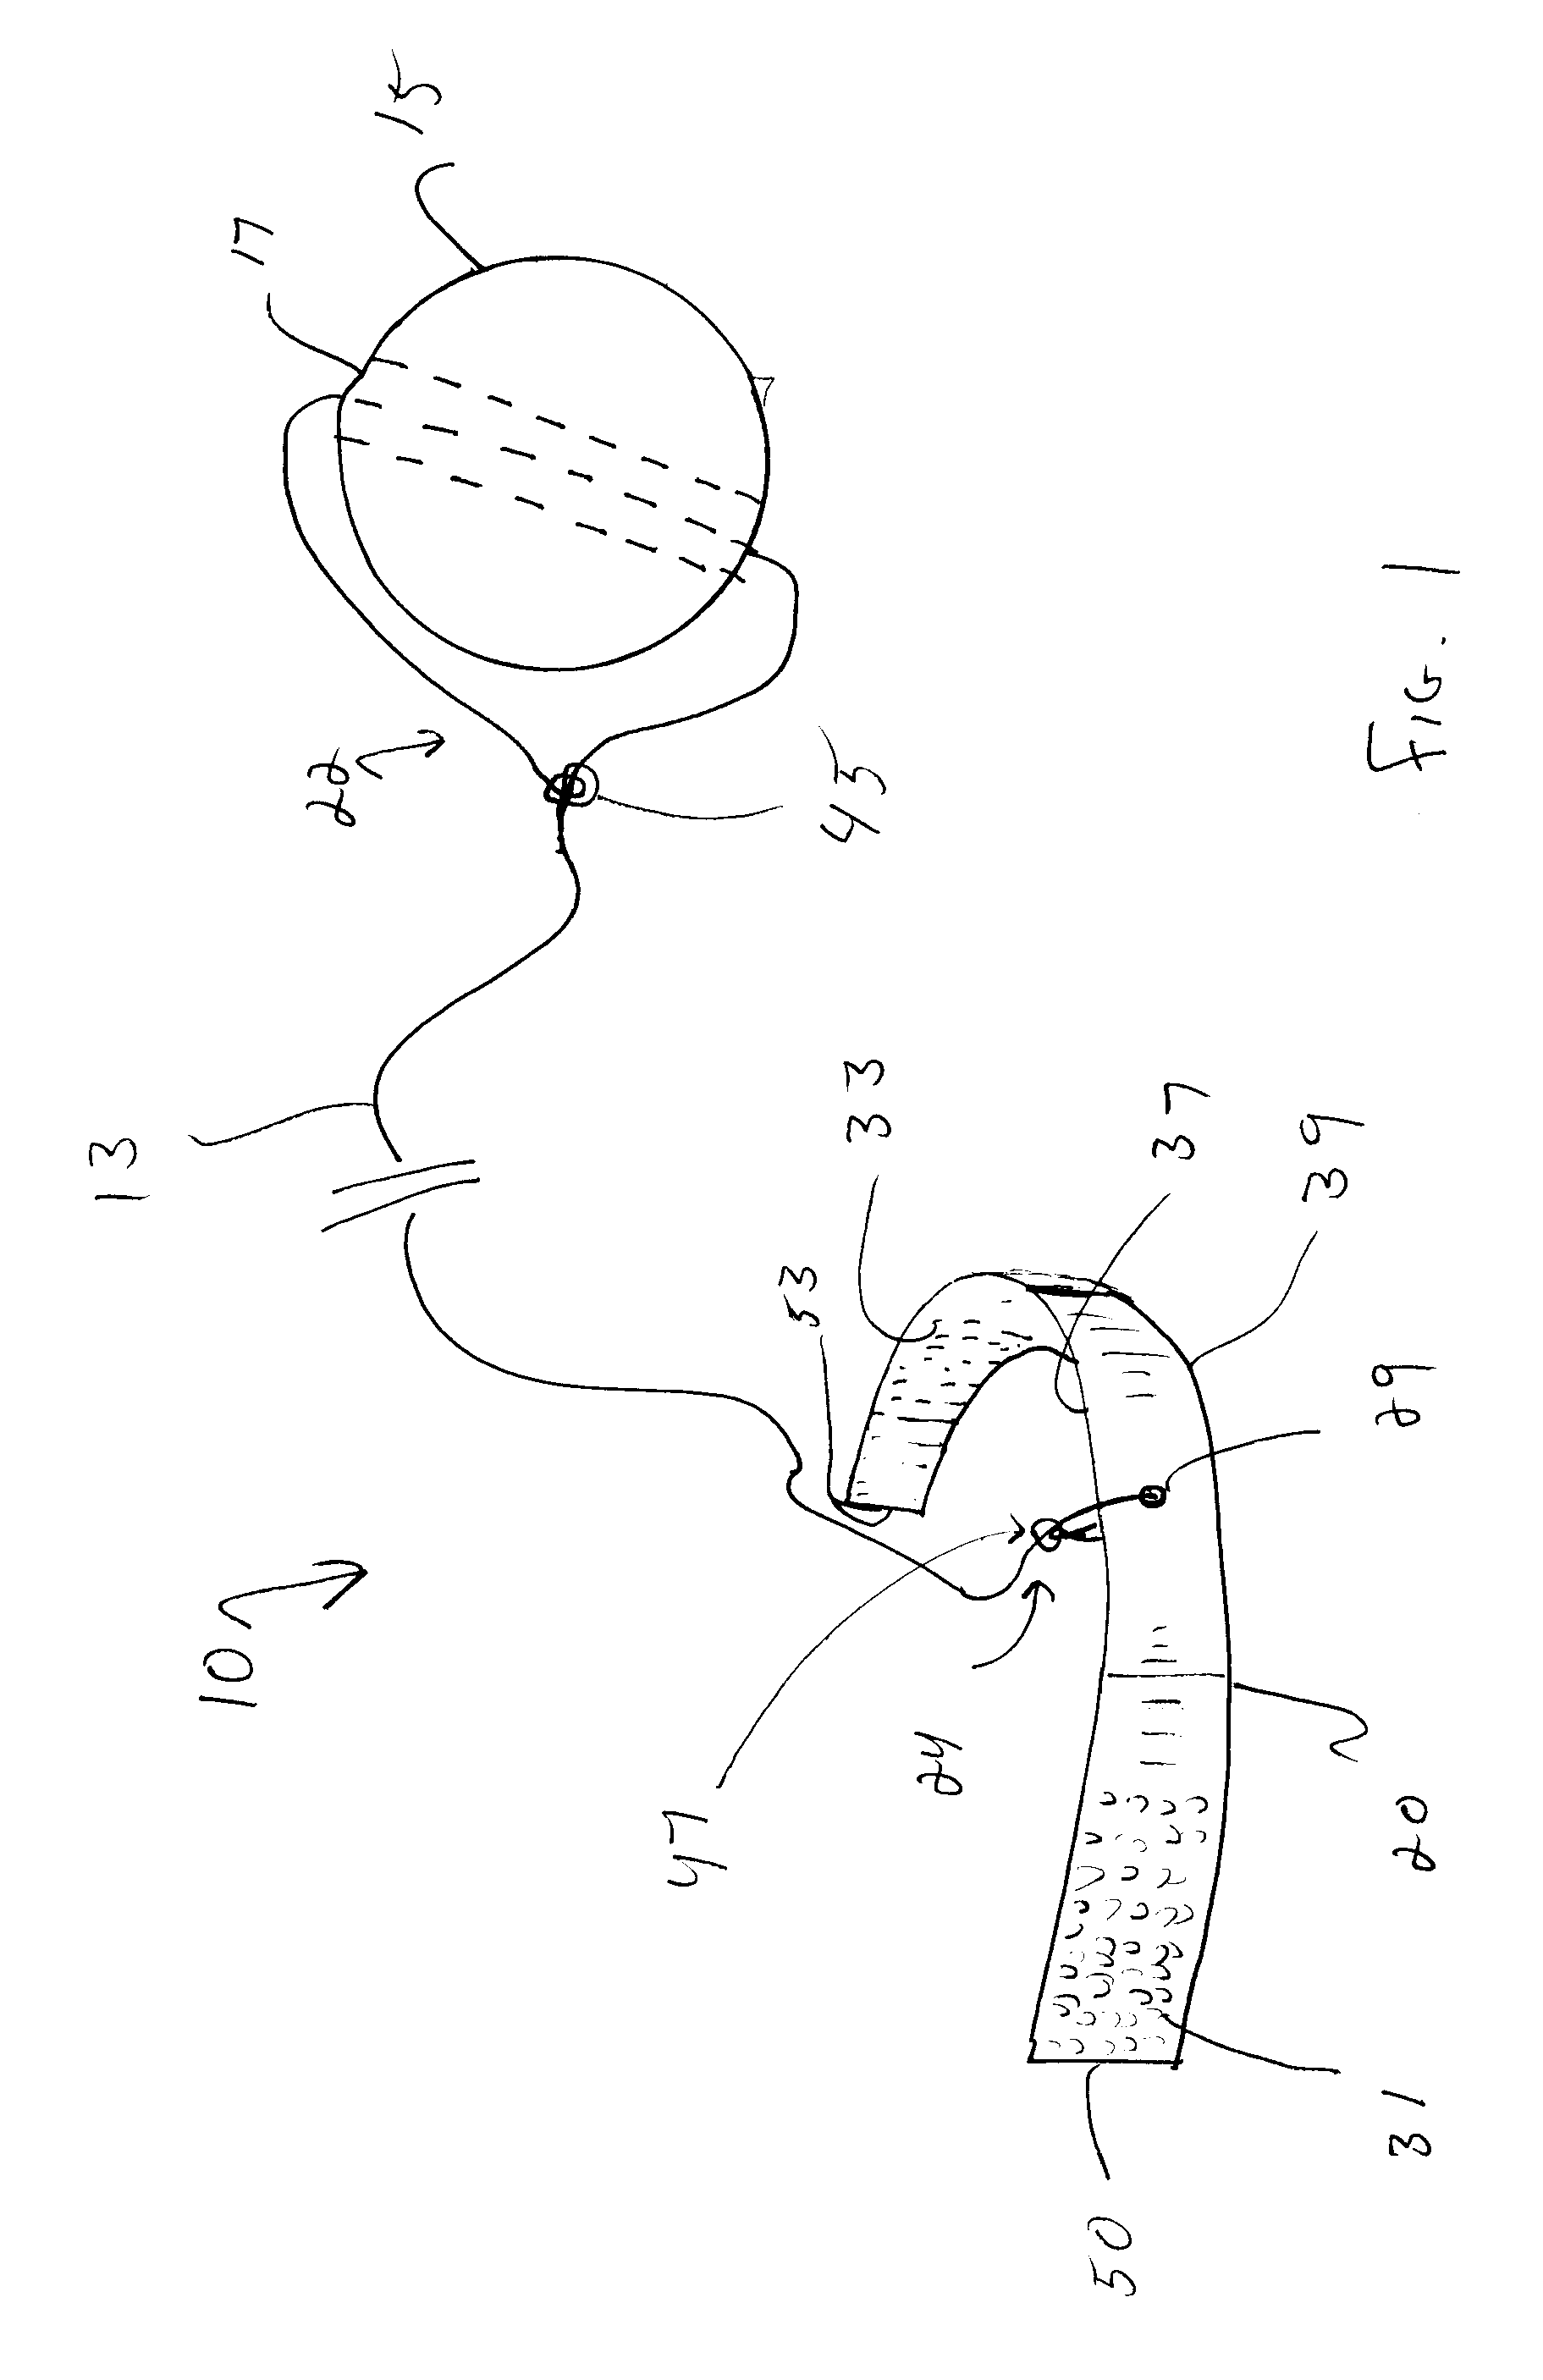 Lacrosse ball and stick practice apparatus and method of making same